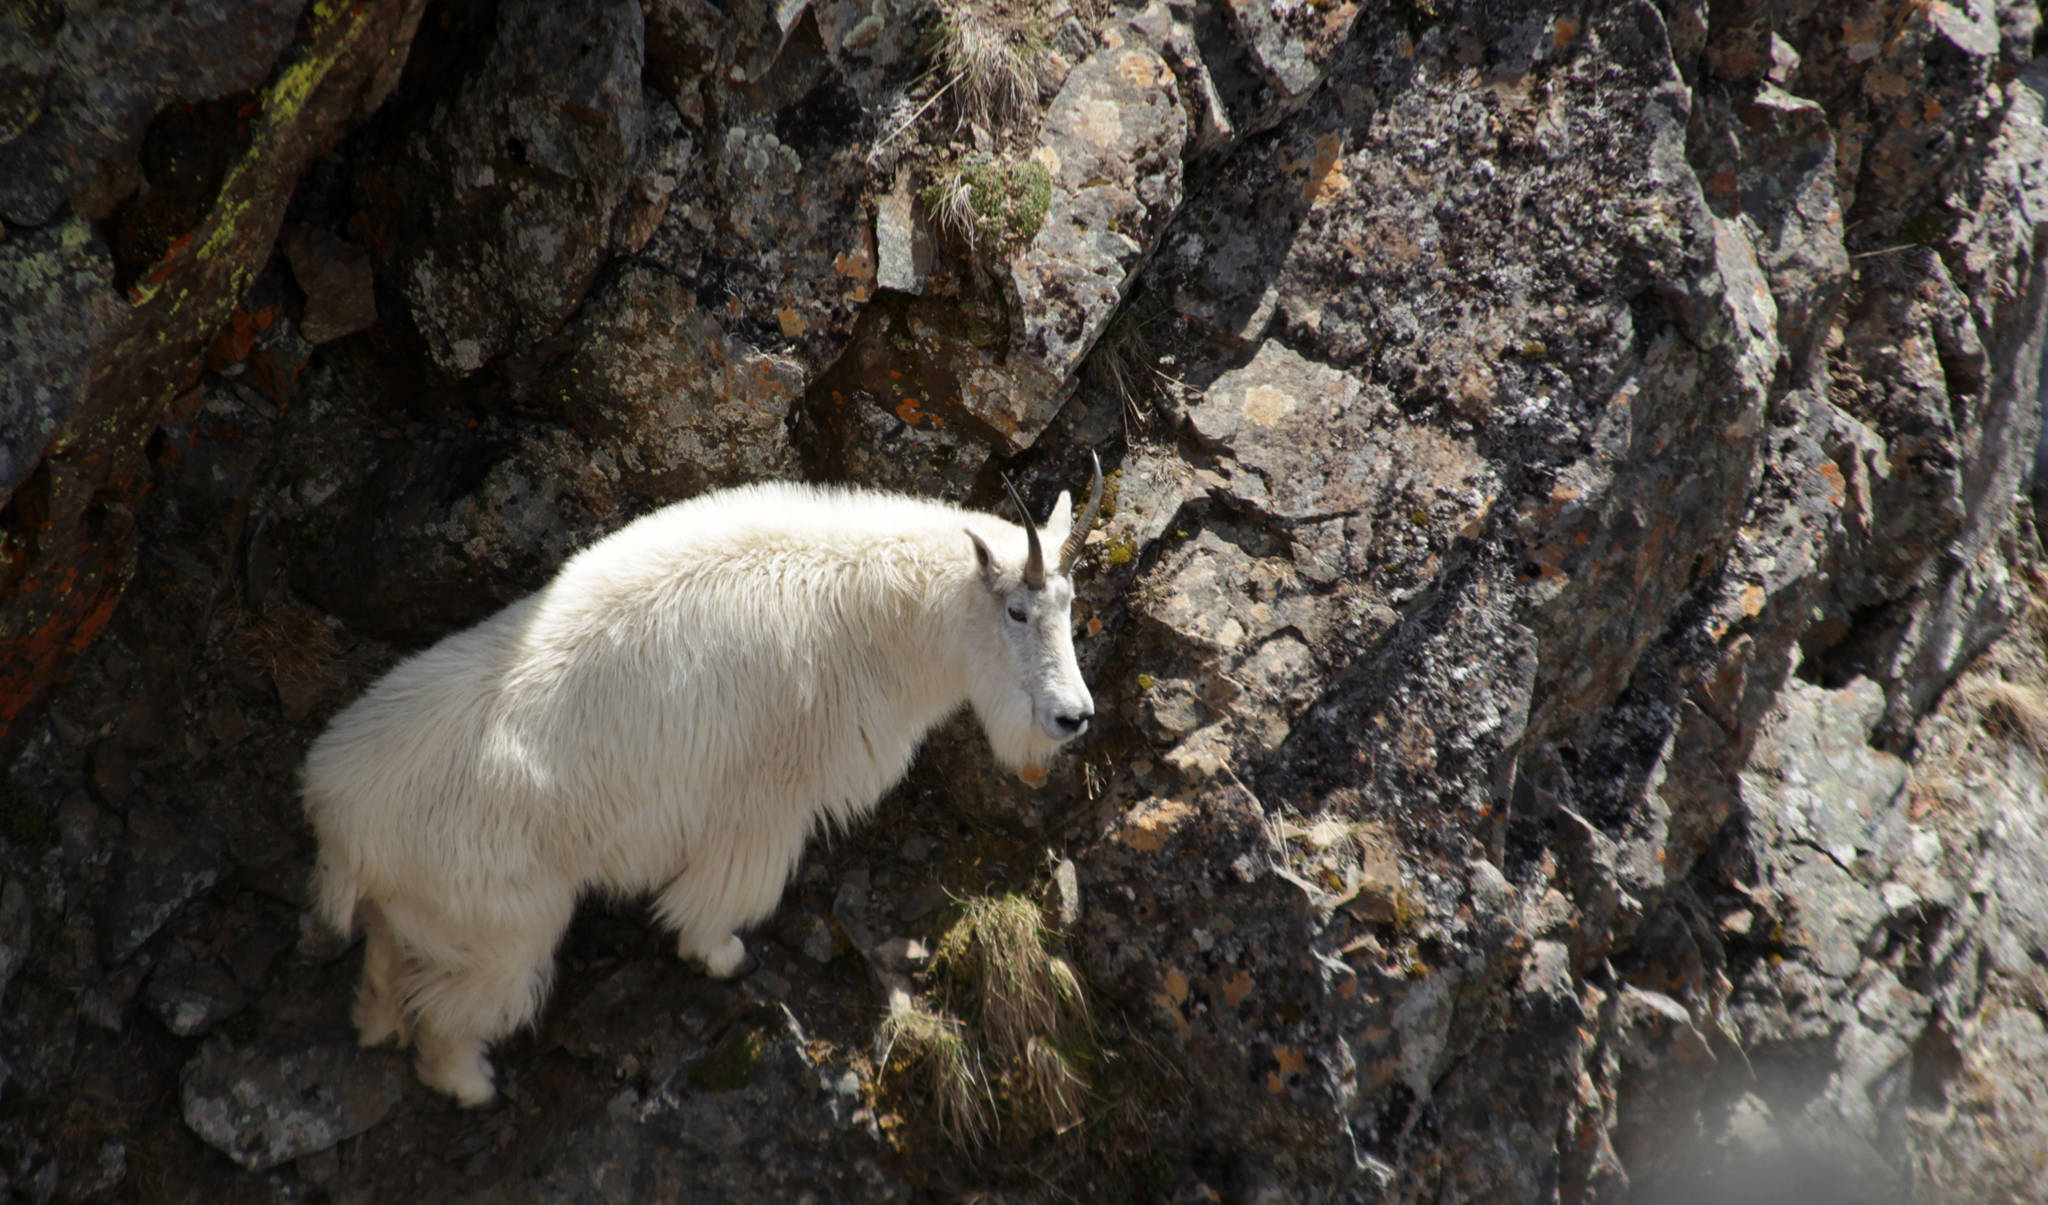 A mountain goat, one of a herd of nine grazing on grasses and lichens on the slope of Point Hope, traverses the wall of a crevice on Saturday, June 3, 2017 near Hope. (Photo by Ben Boettger/Peninsula Clarion)